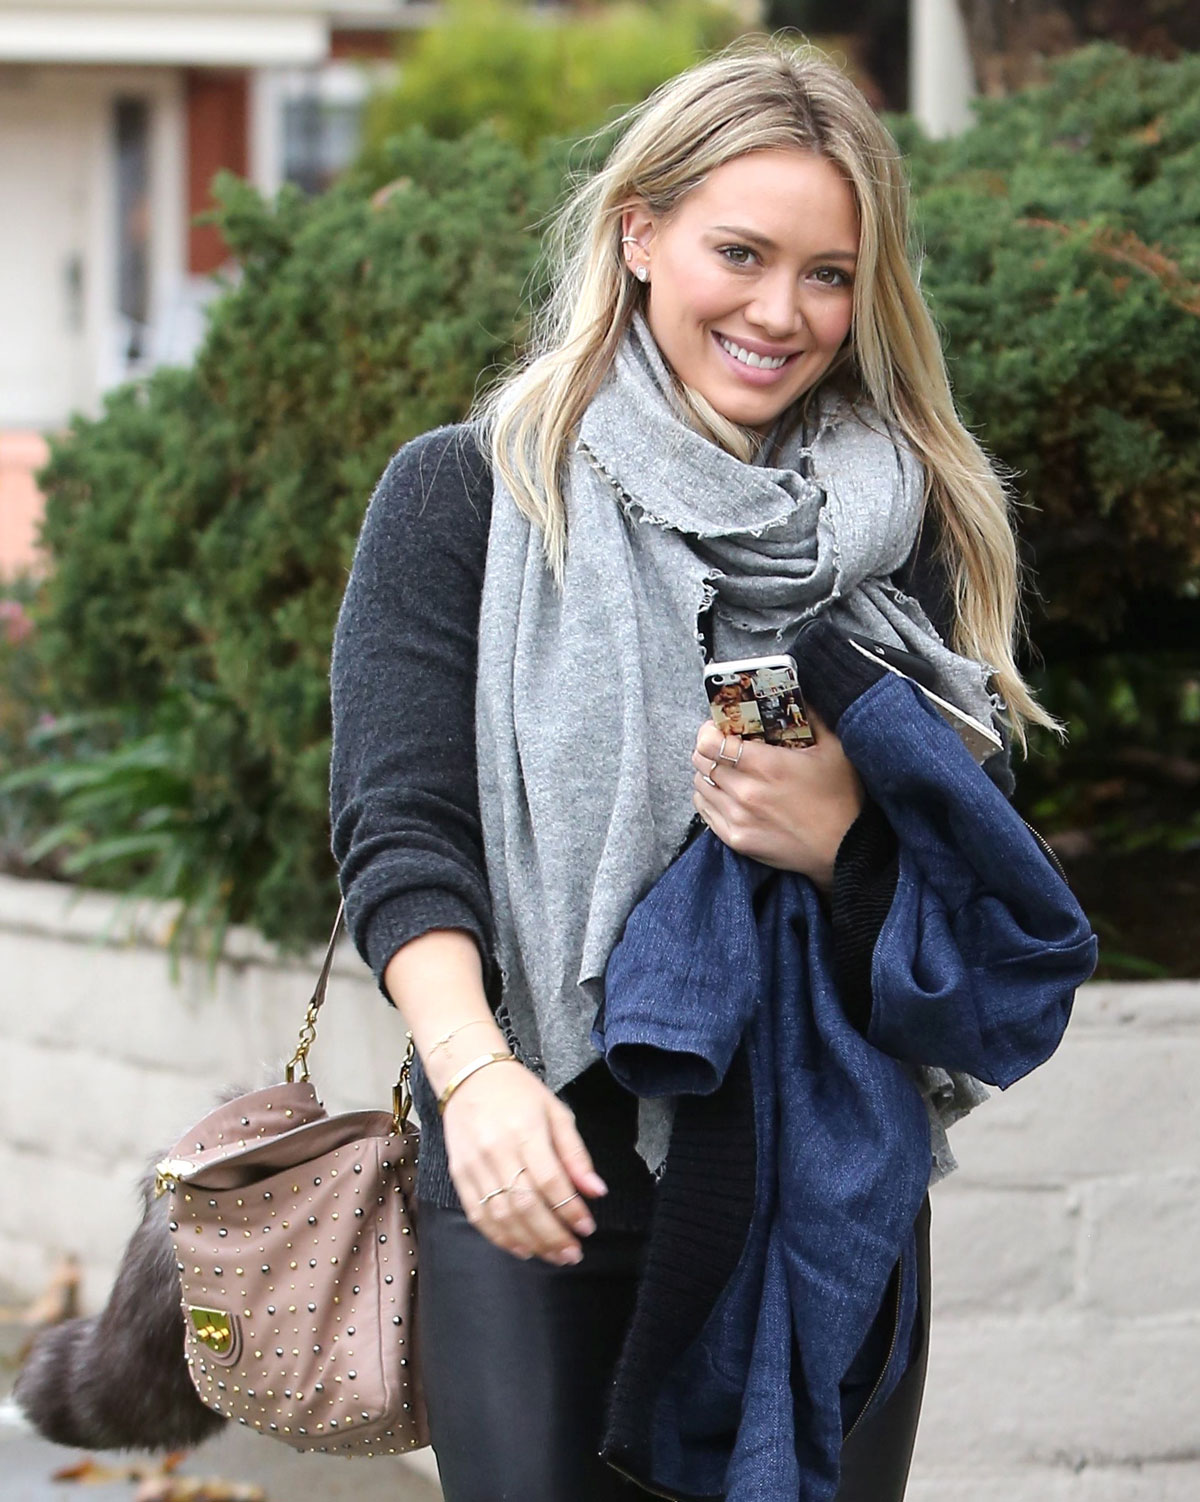 Hilary Duff was spotted while out in Beverly Hills